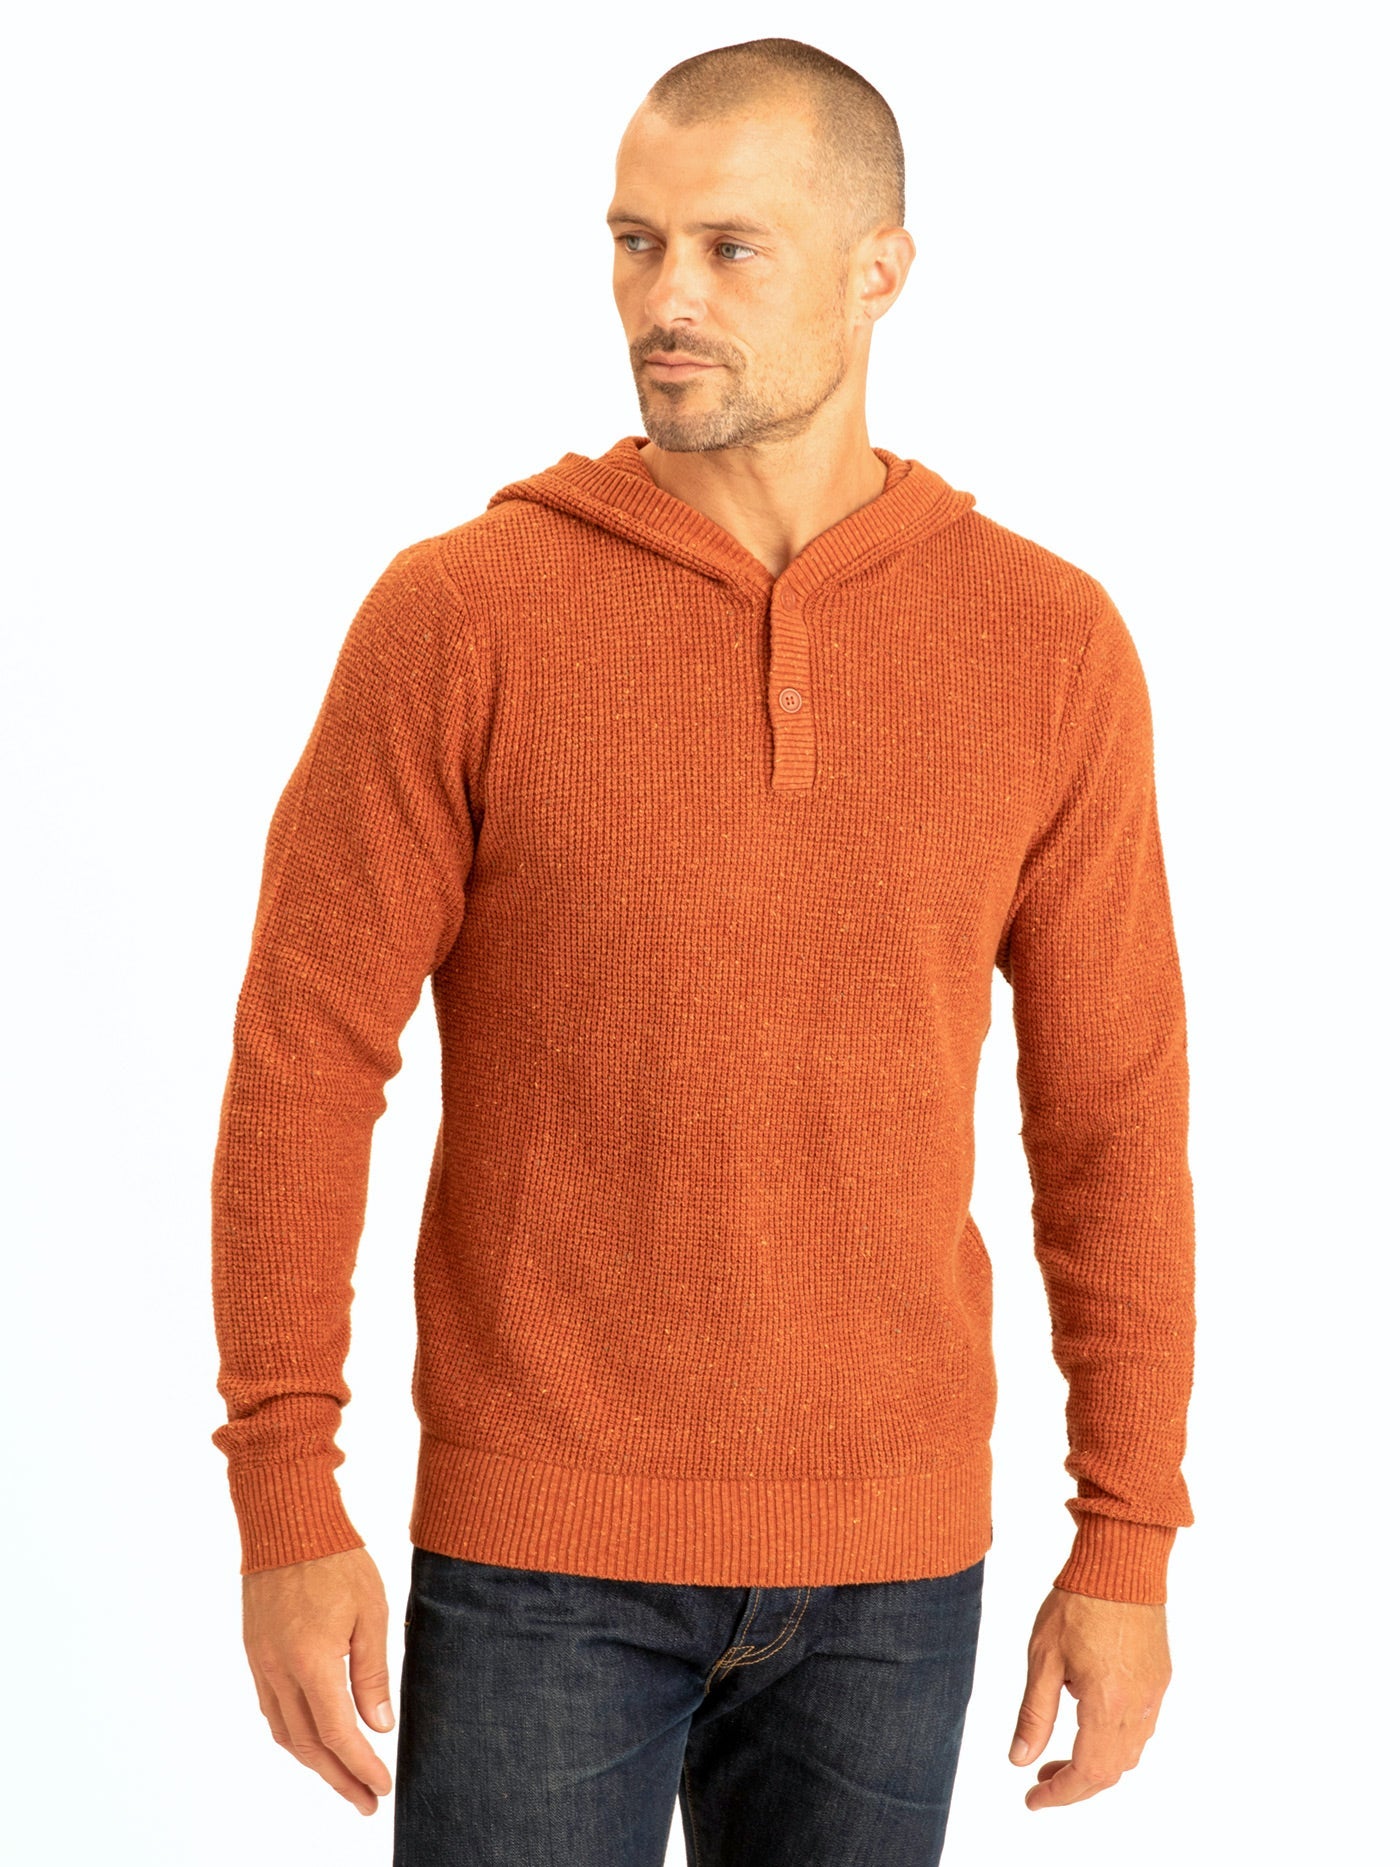 Raja Waffle Knit Henley Hoodie Sweater Mens Outerwear Sweater Threads 4 Thought 